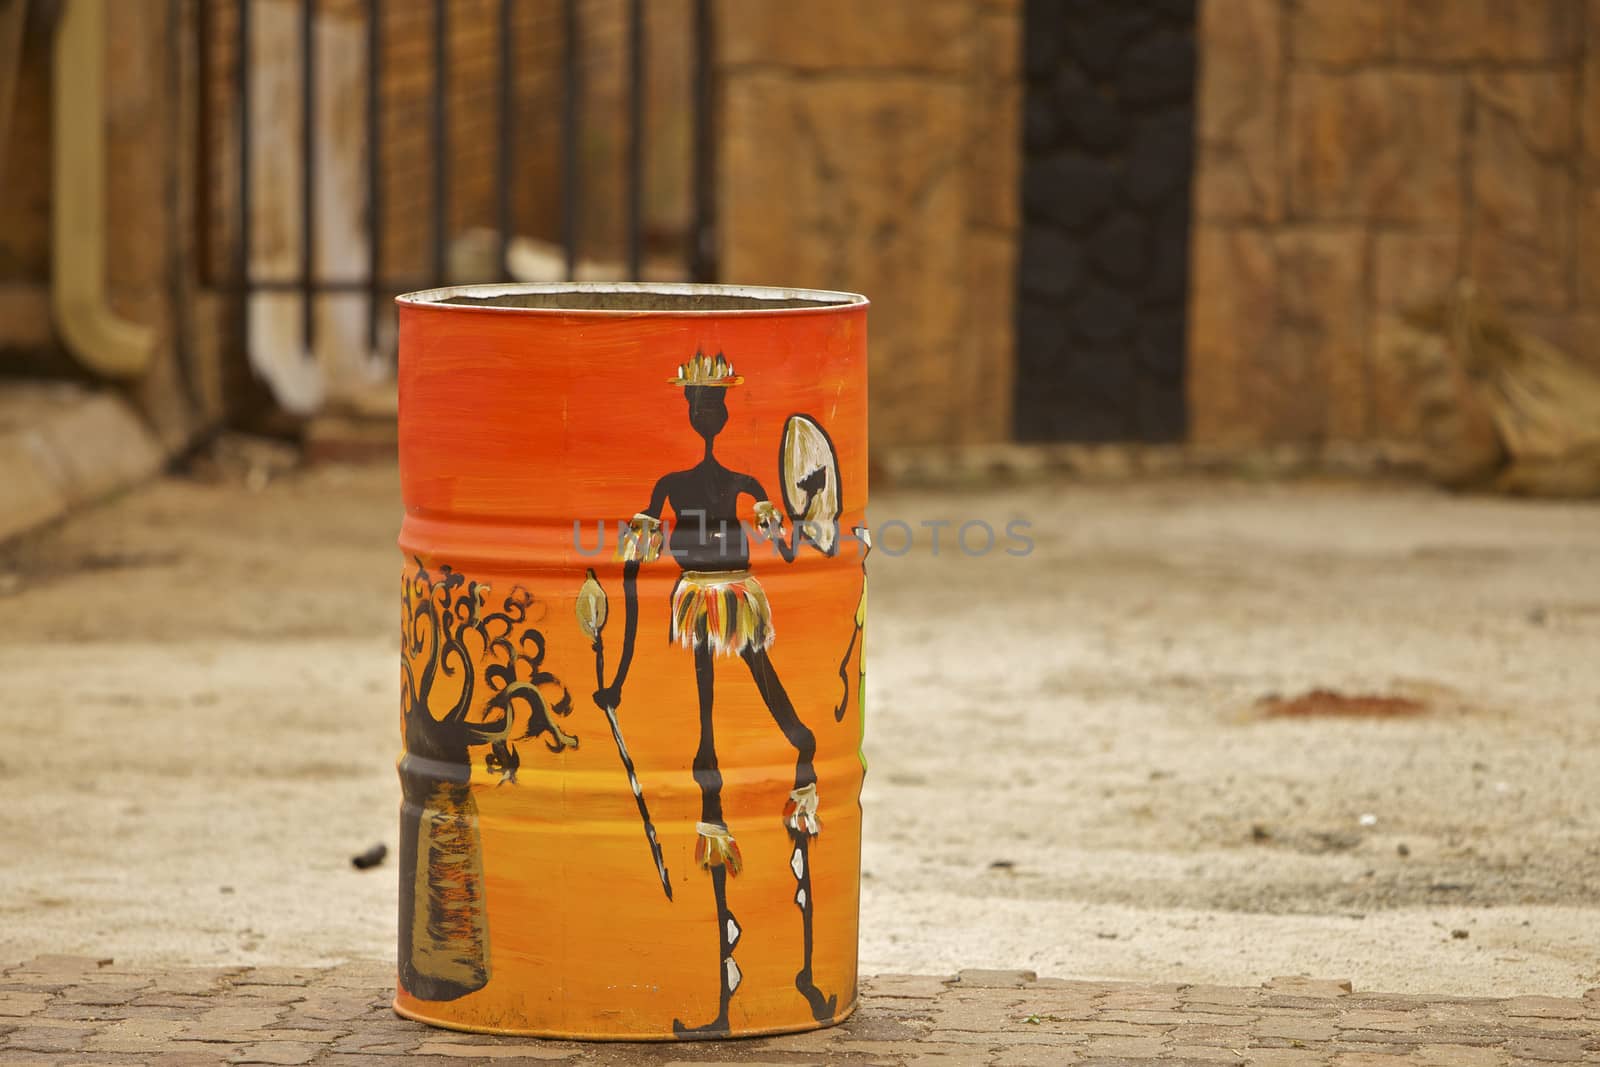 South Africa Rural Art Painted on a oil can